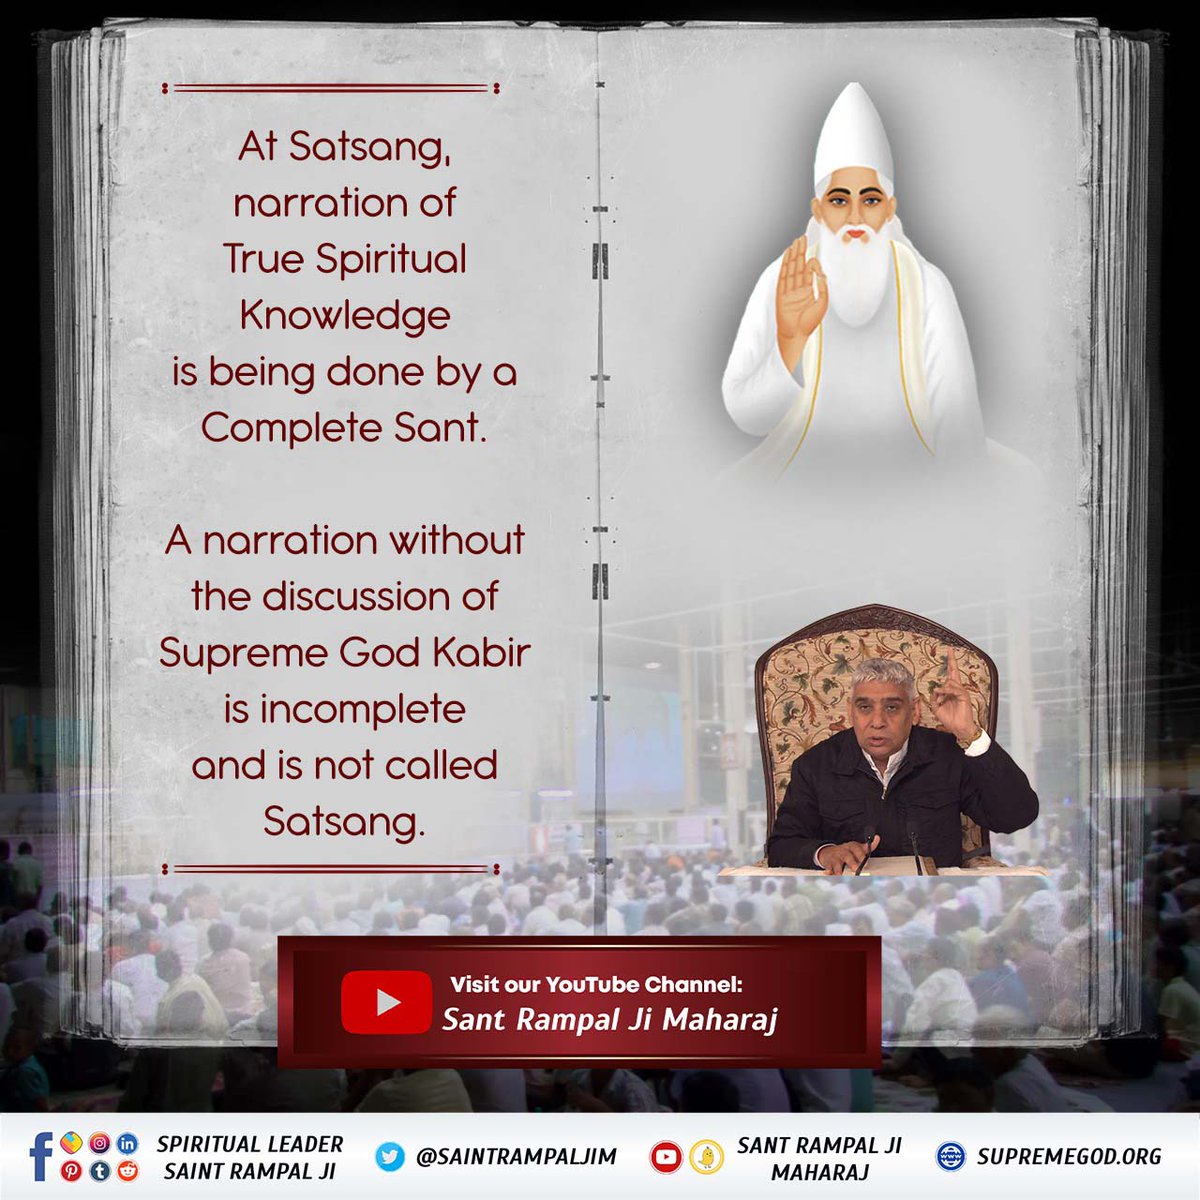 #सत्संग_से_ही_सुख_है
At Satsang narration of True Spiritual knowledge is being done by a Complete Sant.

A narration without the discussion of Supreme God Kabir is incomplete and is not called Satsang.

Sant Rampal Ji Maharaj